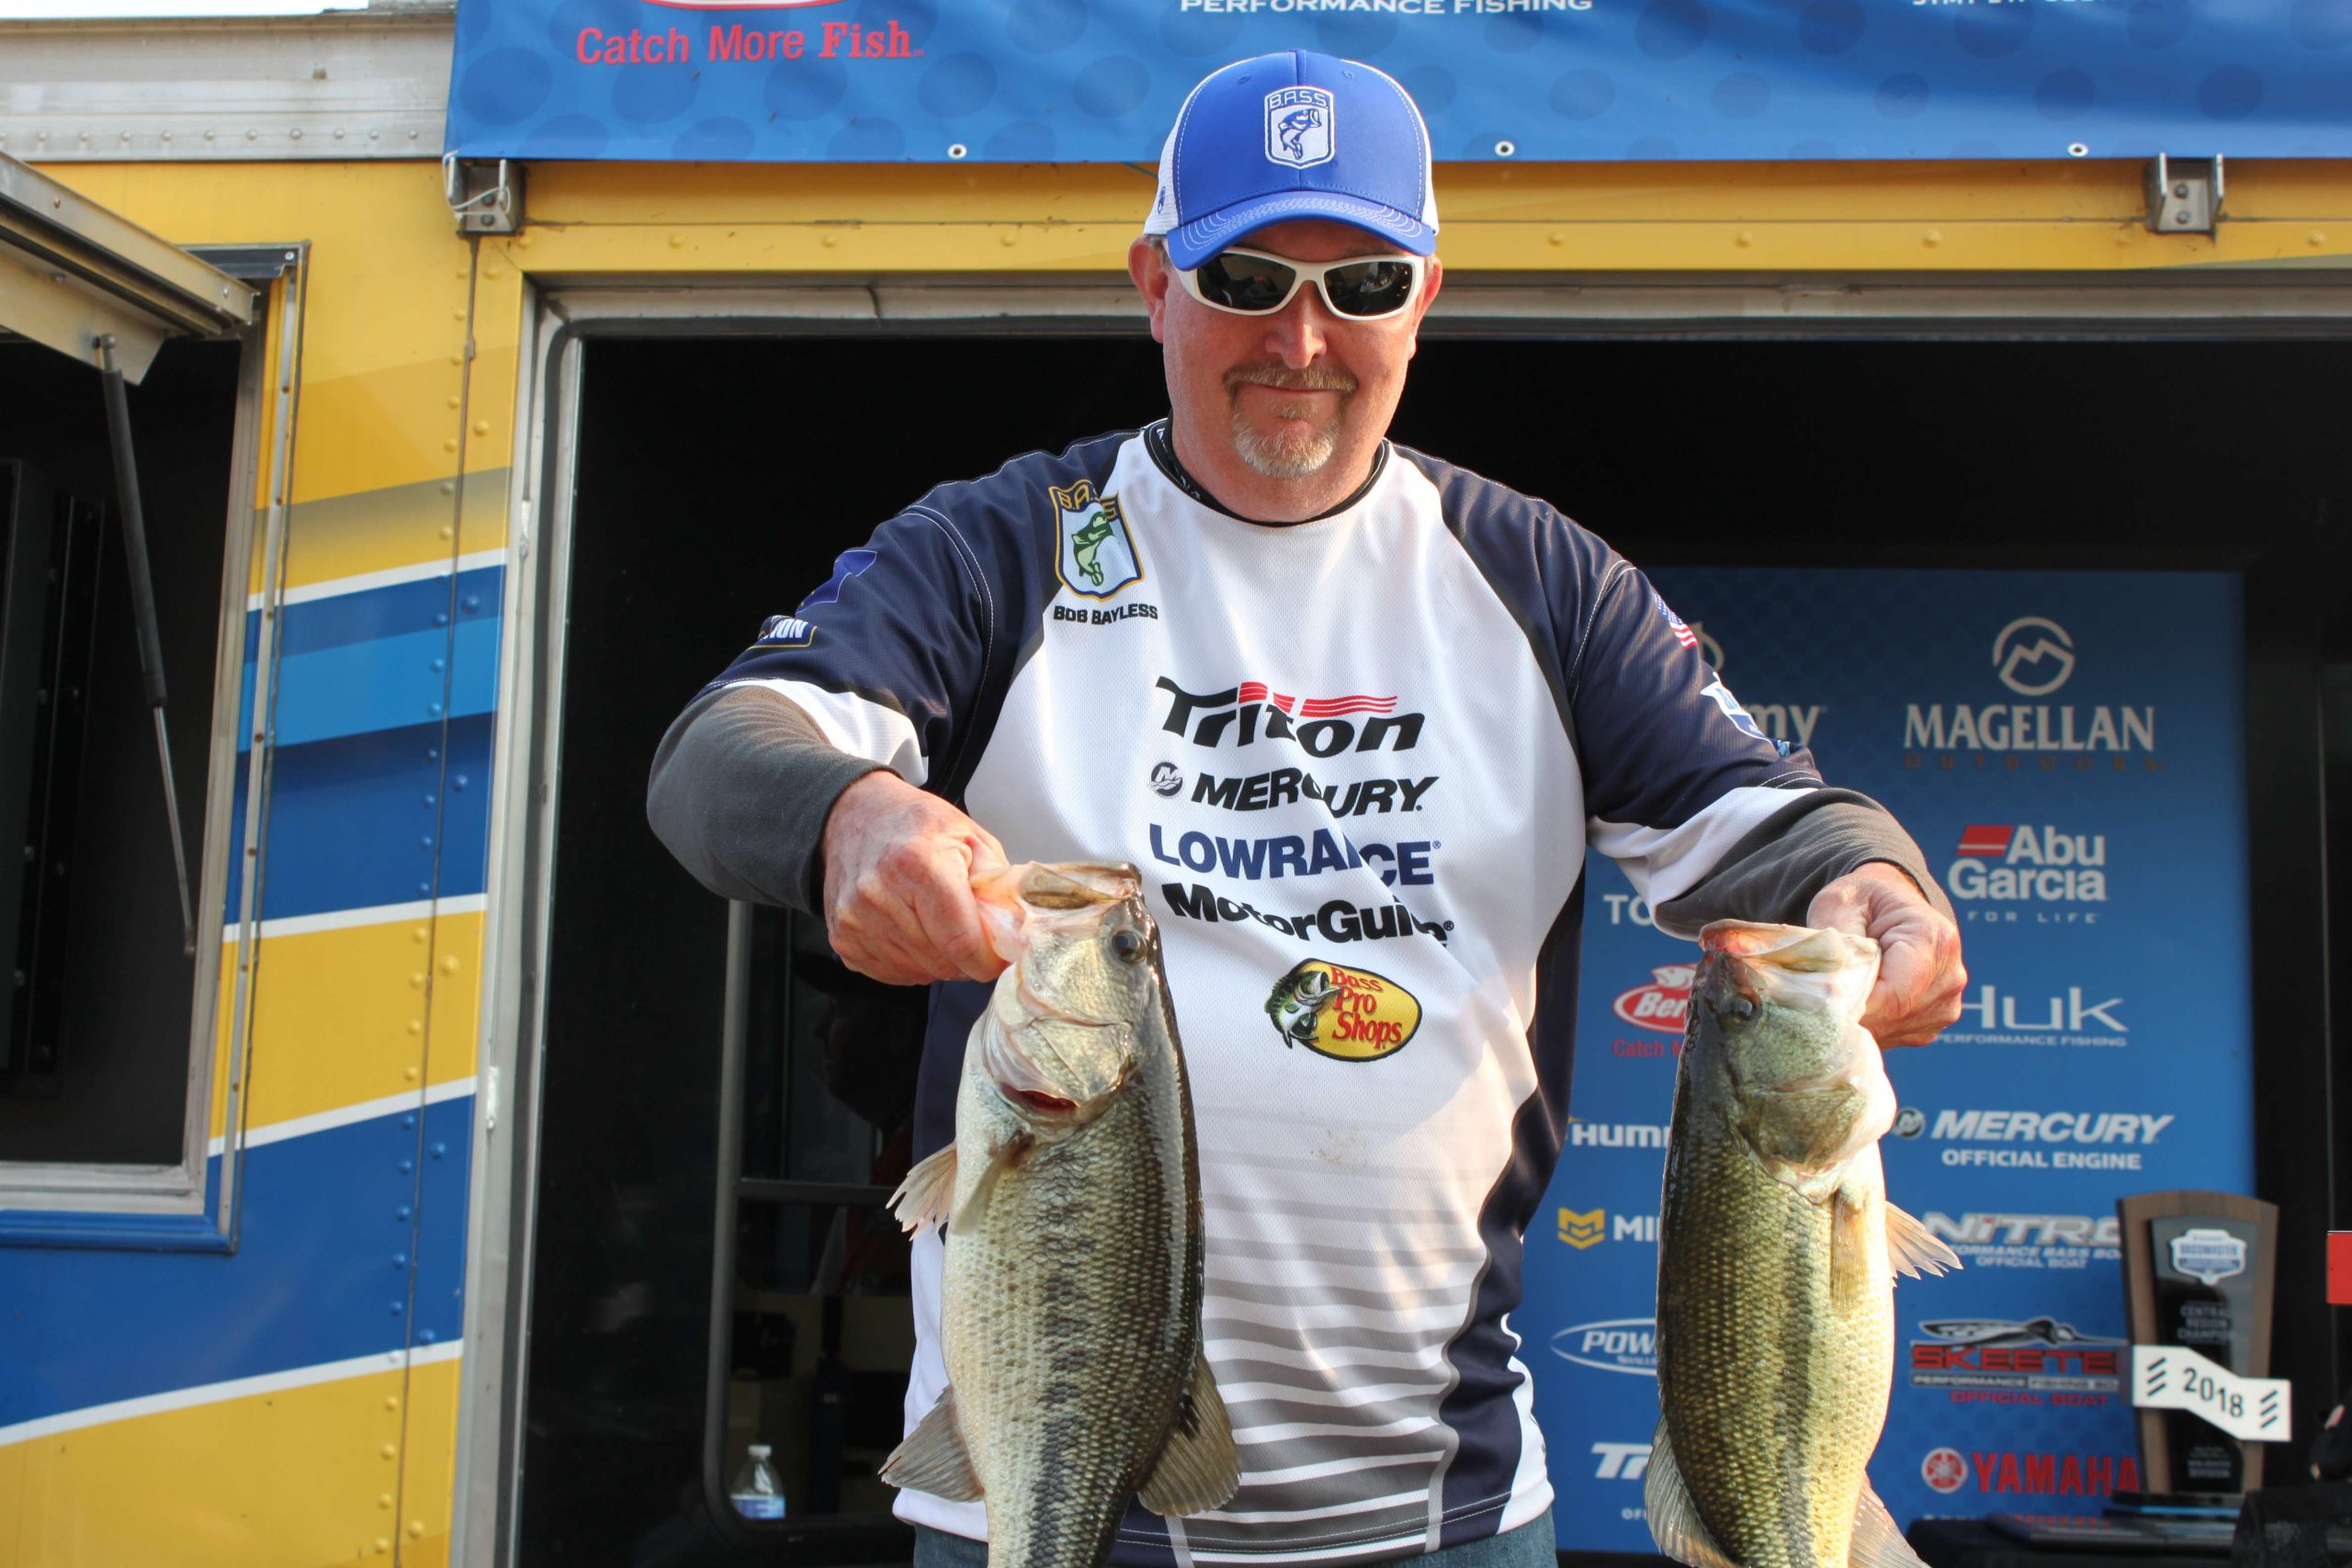 And the weigh-in continues. Bob Bayless of Indiana finished 14th with 44 pounds over three days.